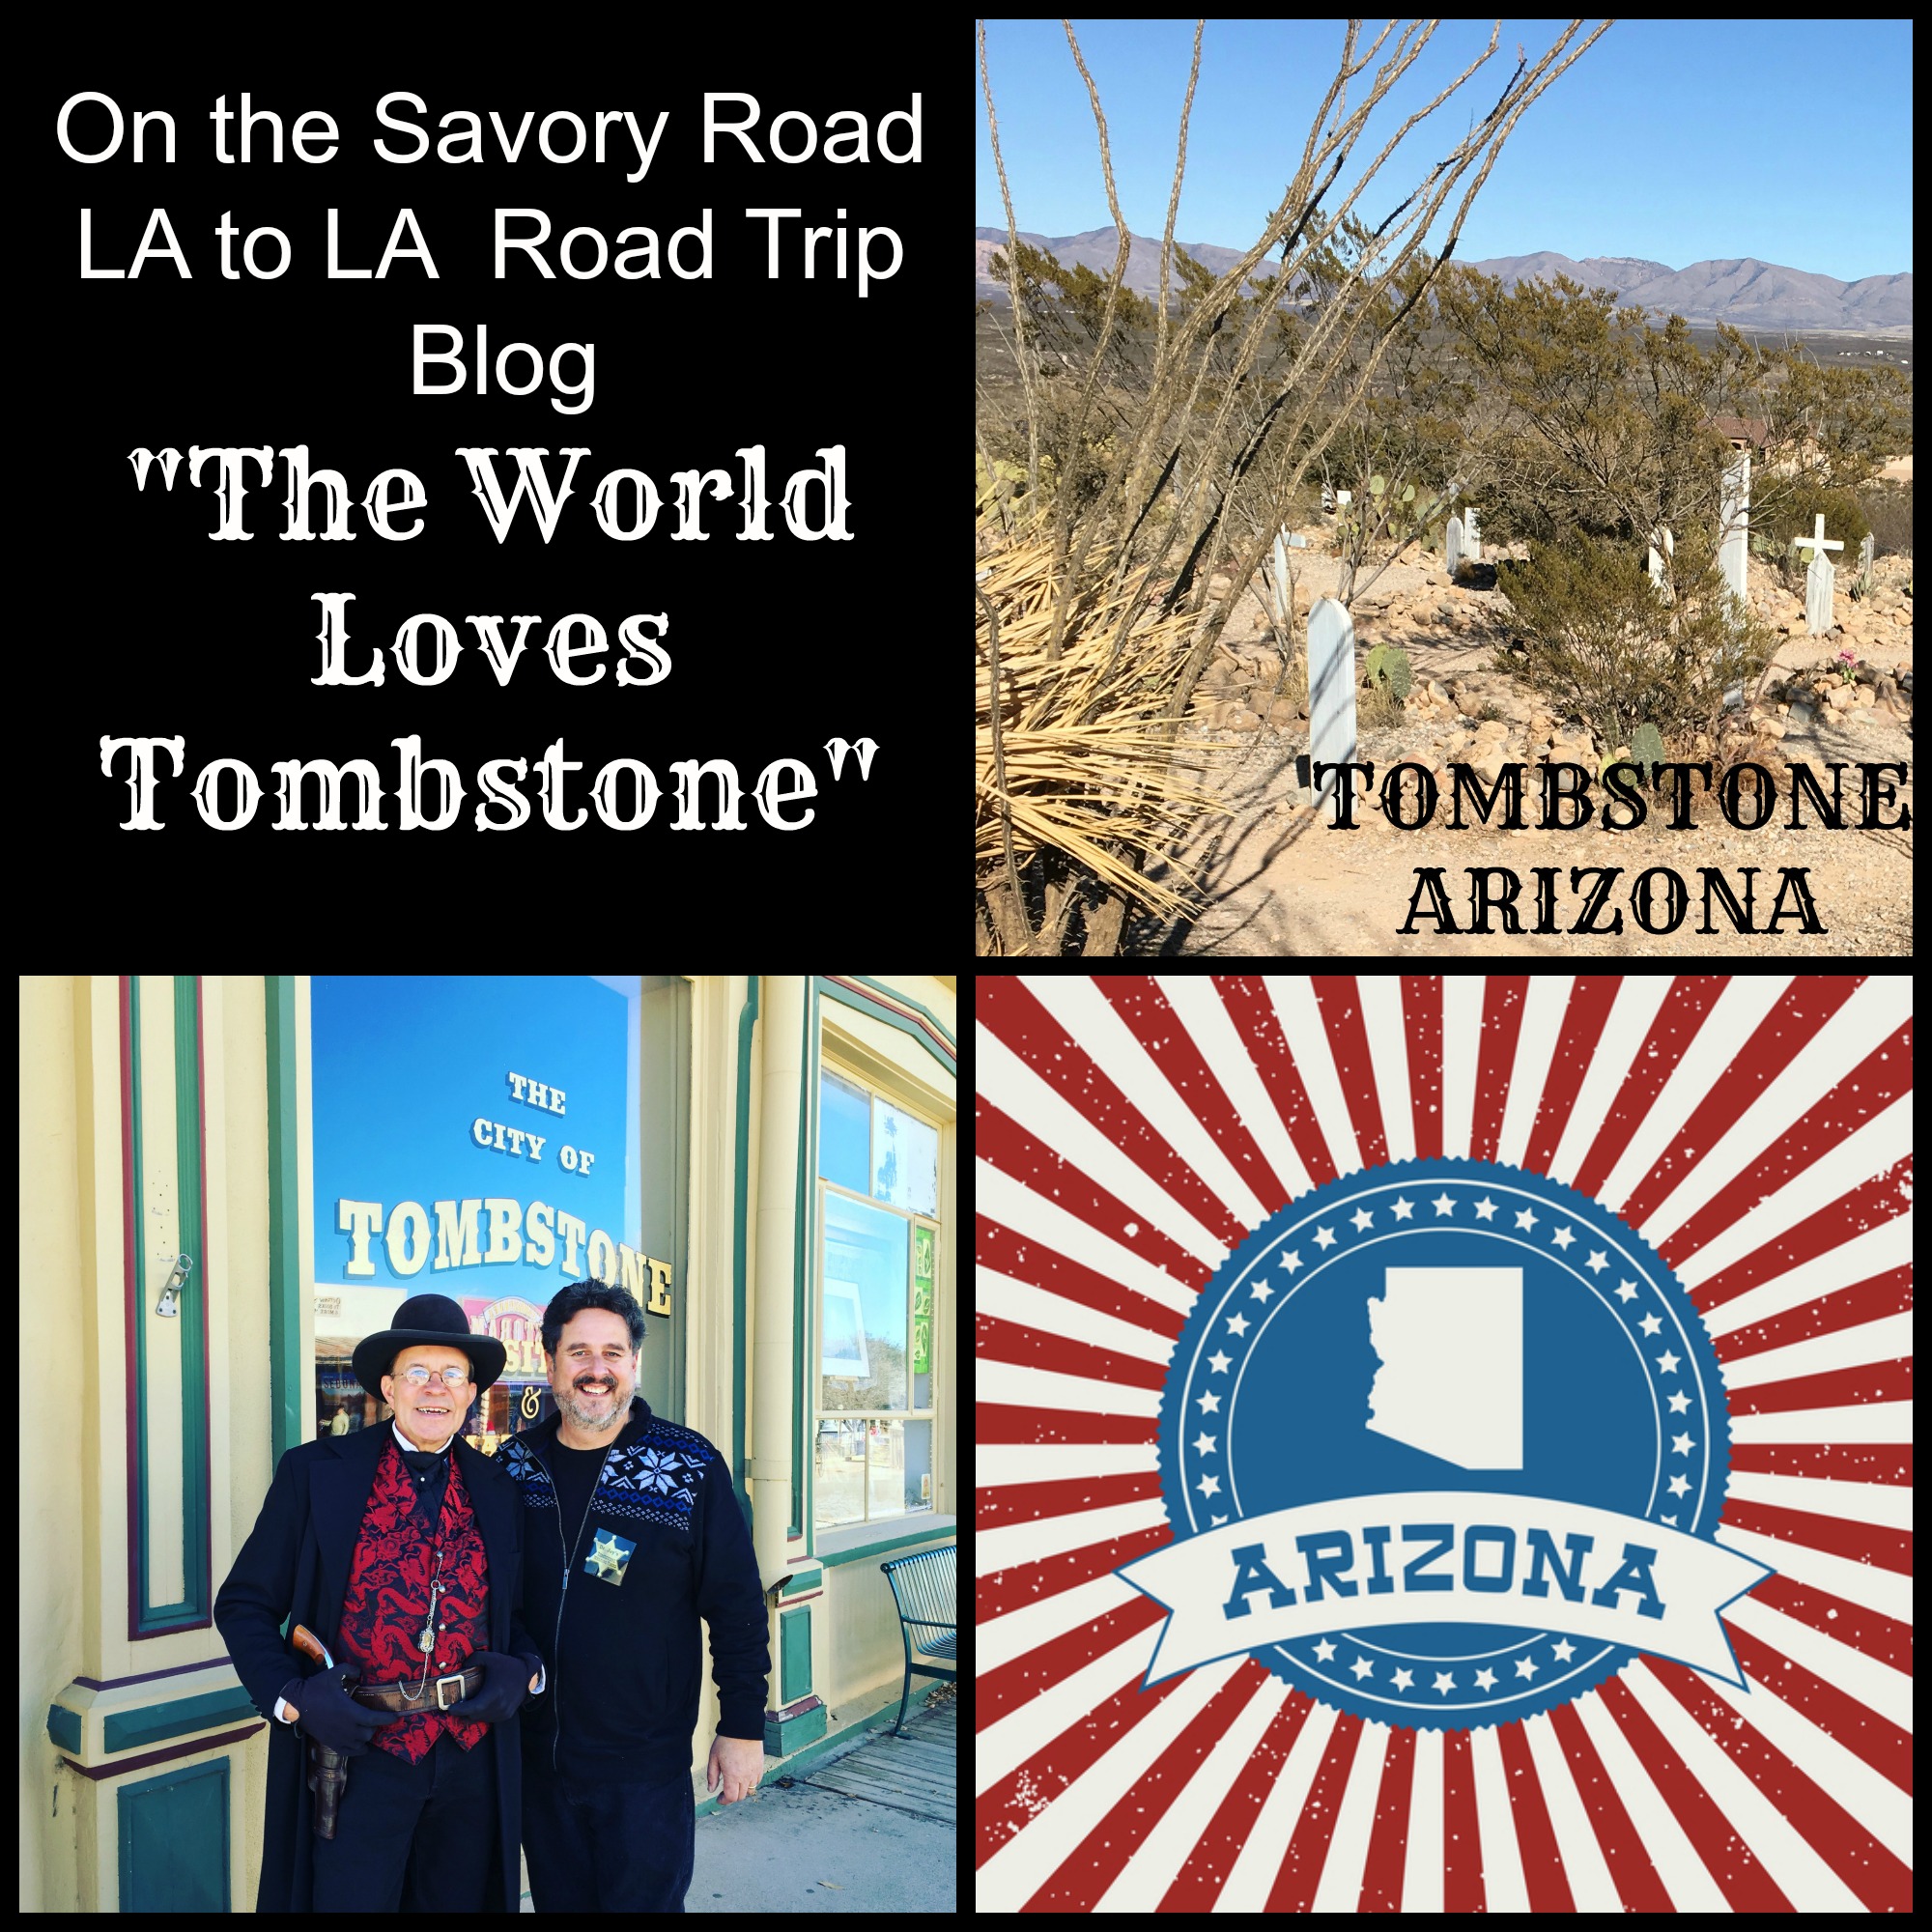 BLOG: The World Loves Tombstone